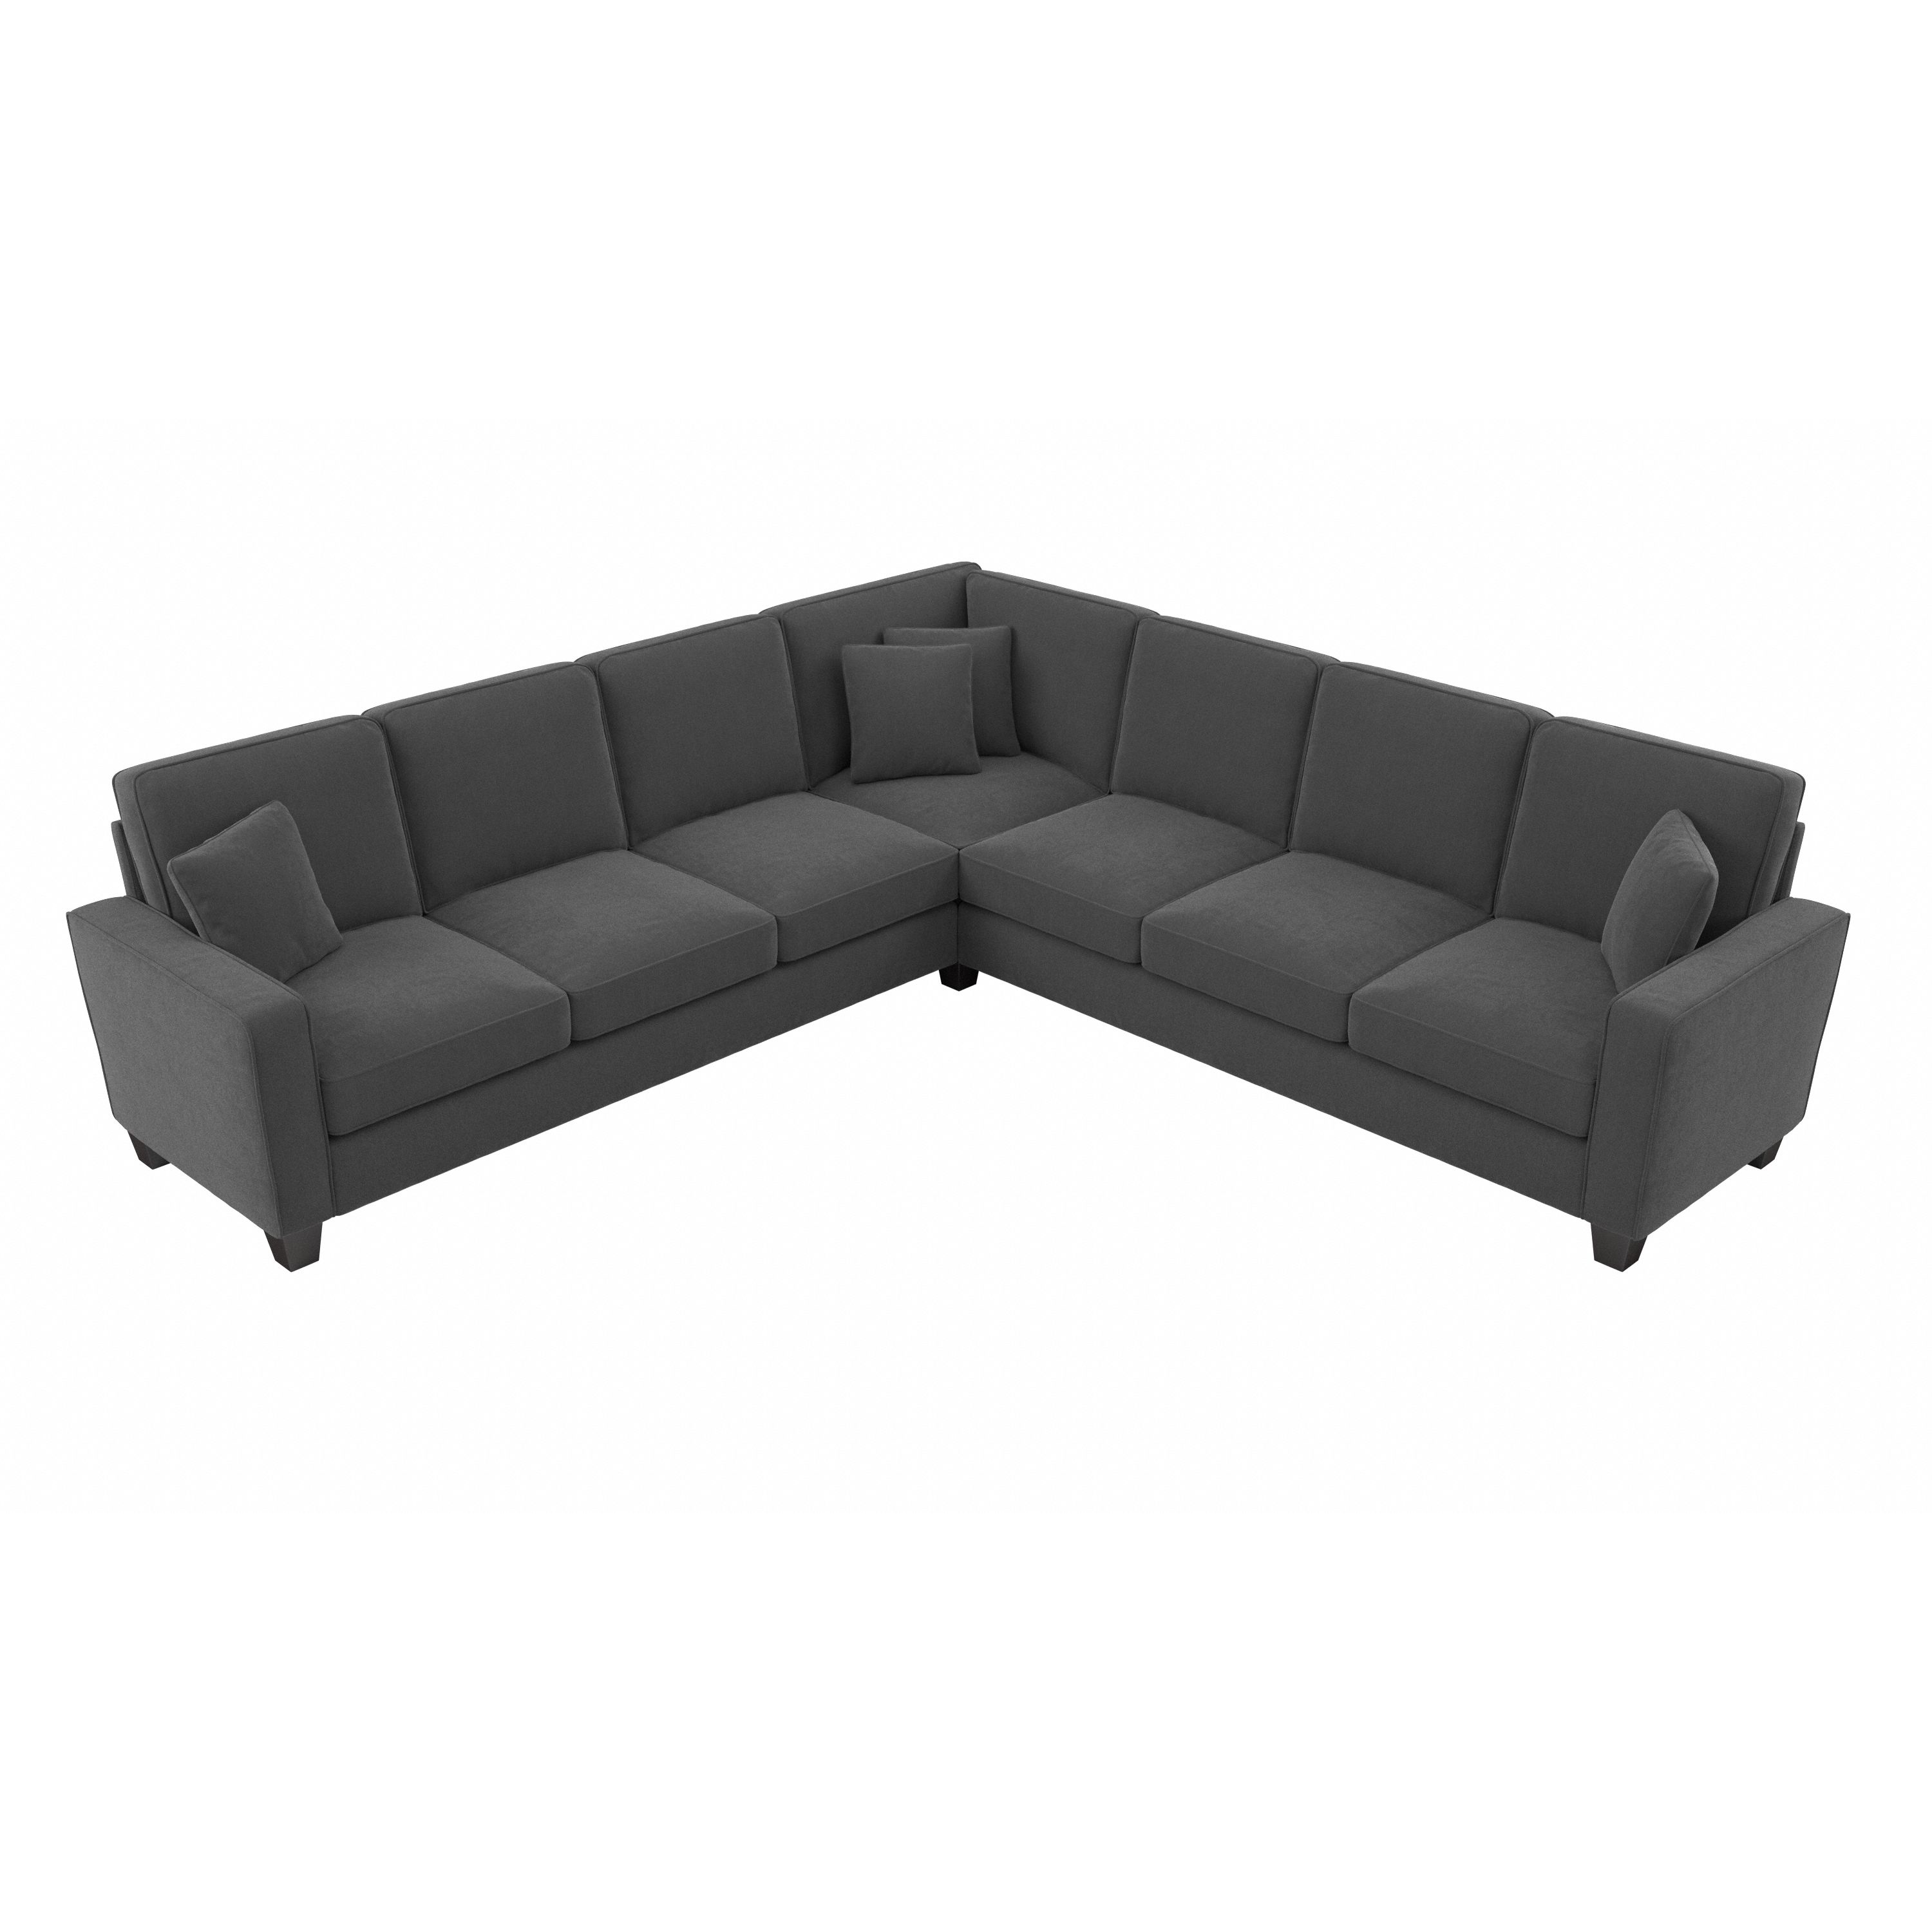 Shop Bush Furniture Stockton 111W L Shaped Sectional Couch 02 SNY110SCGH-03K #color_charcoal gray herringbone fabr